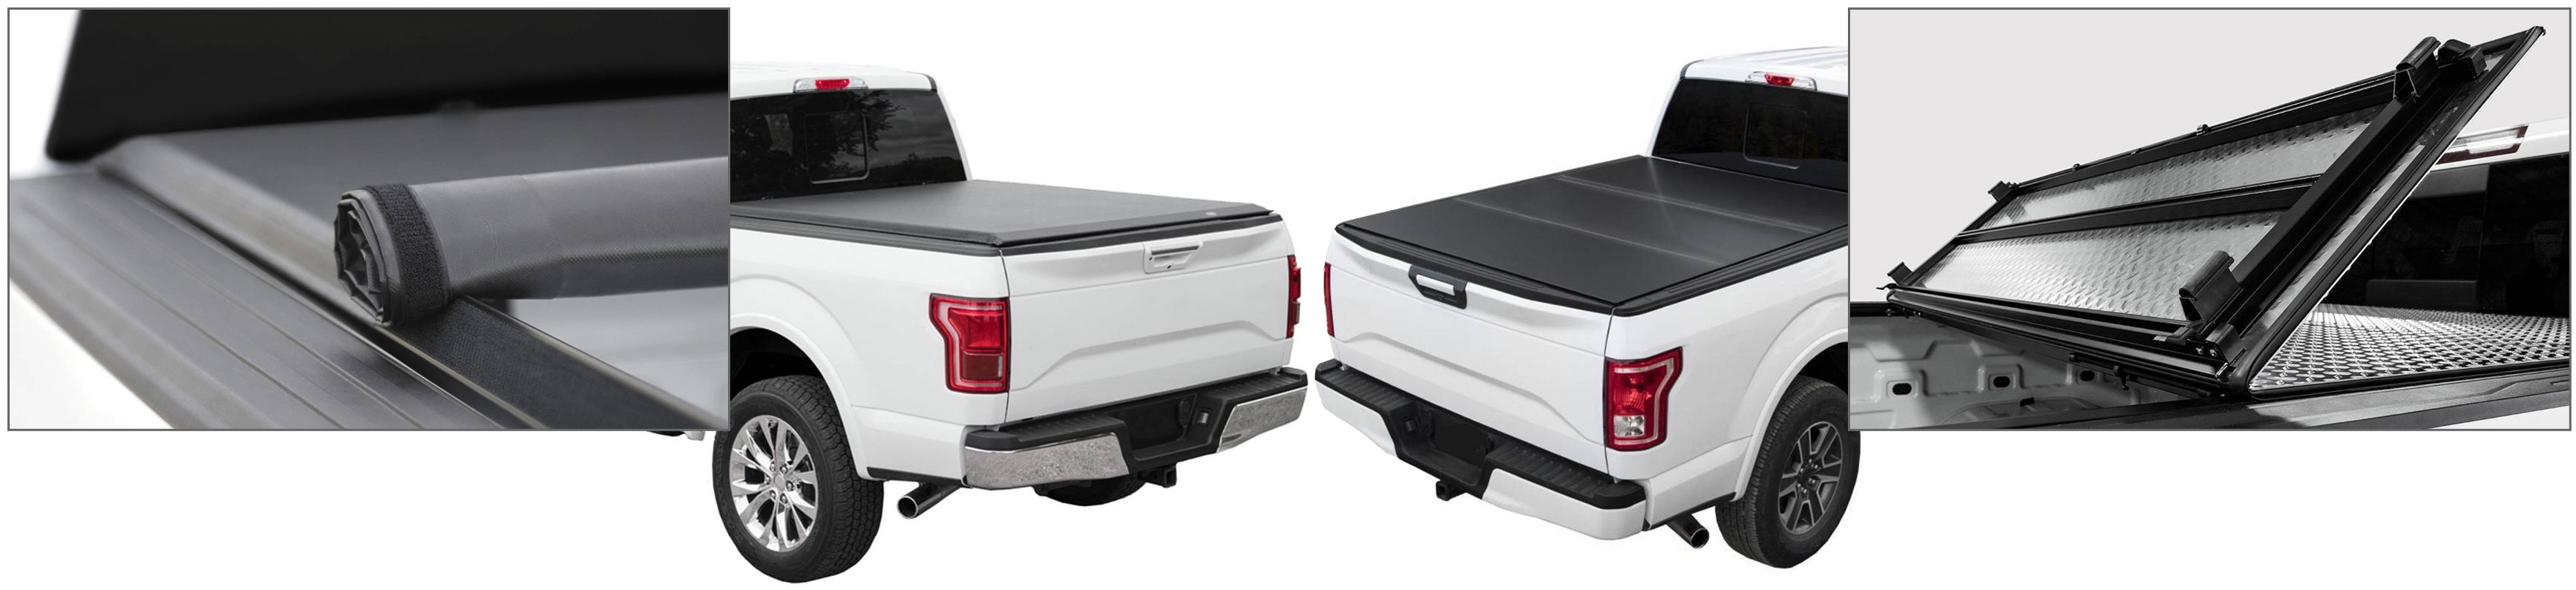 Tailored Truck Covers